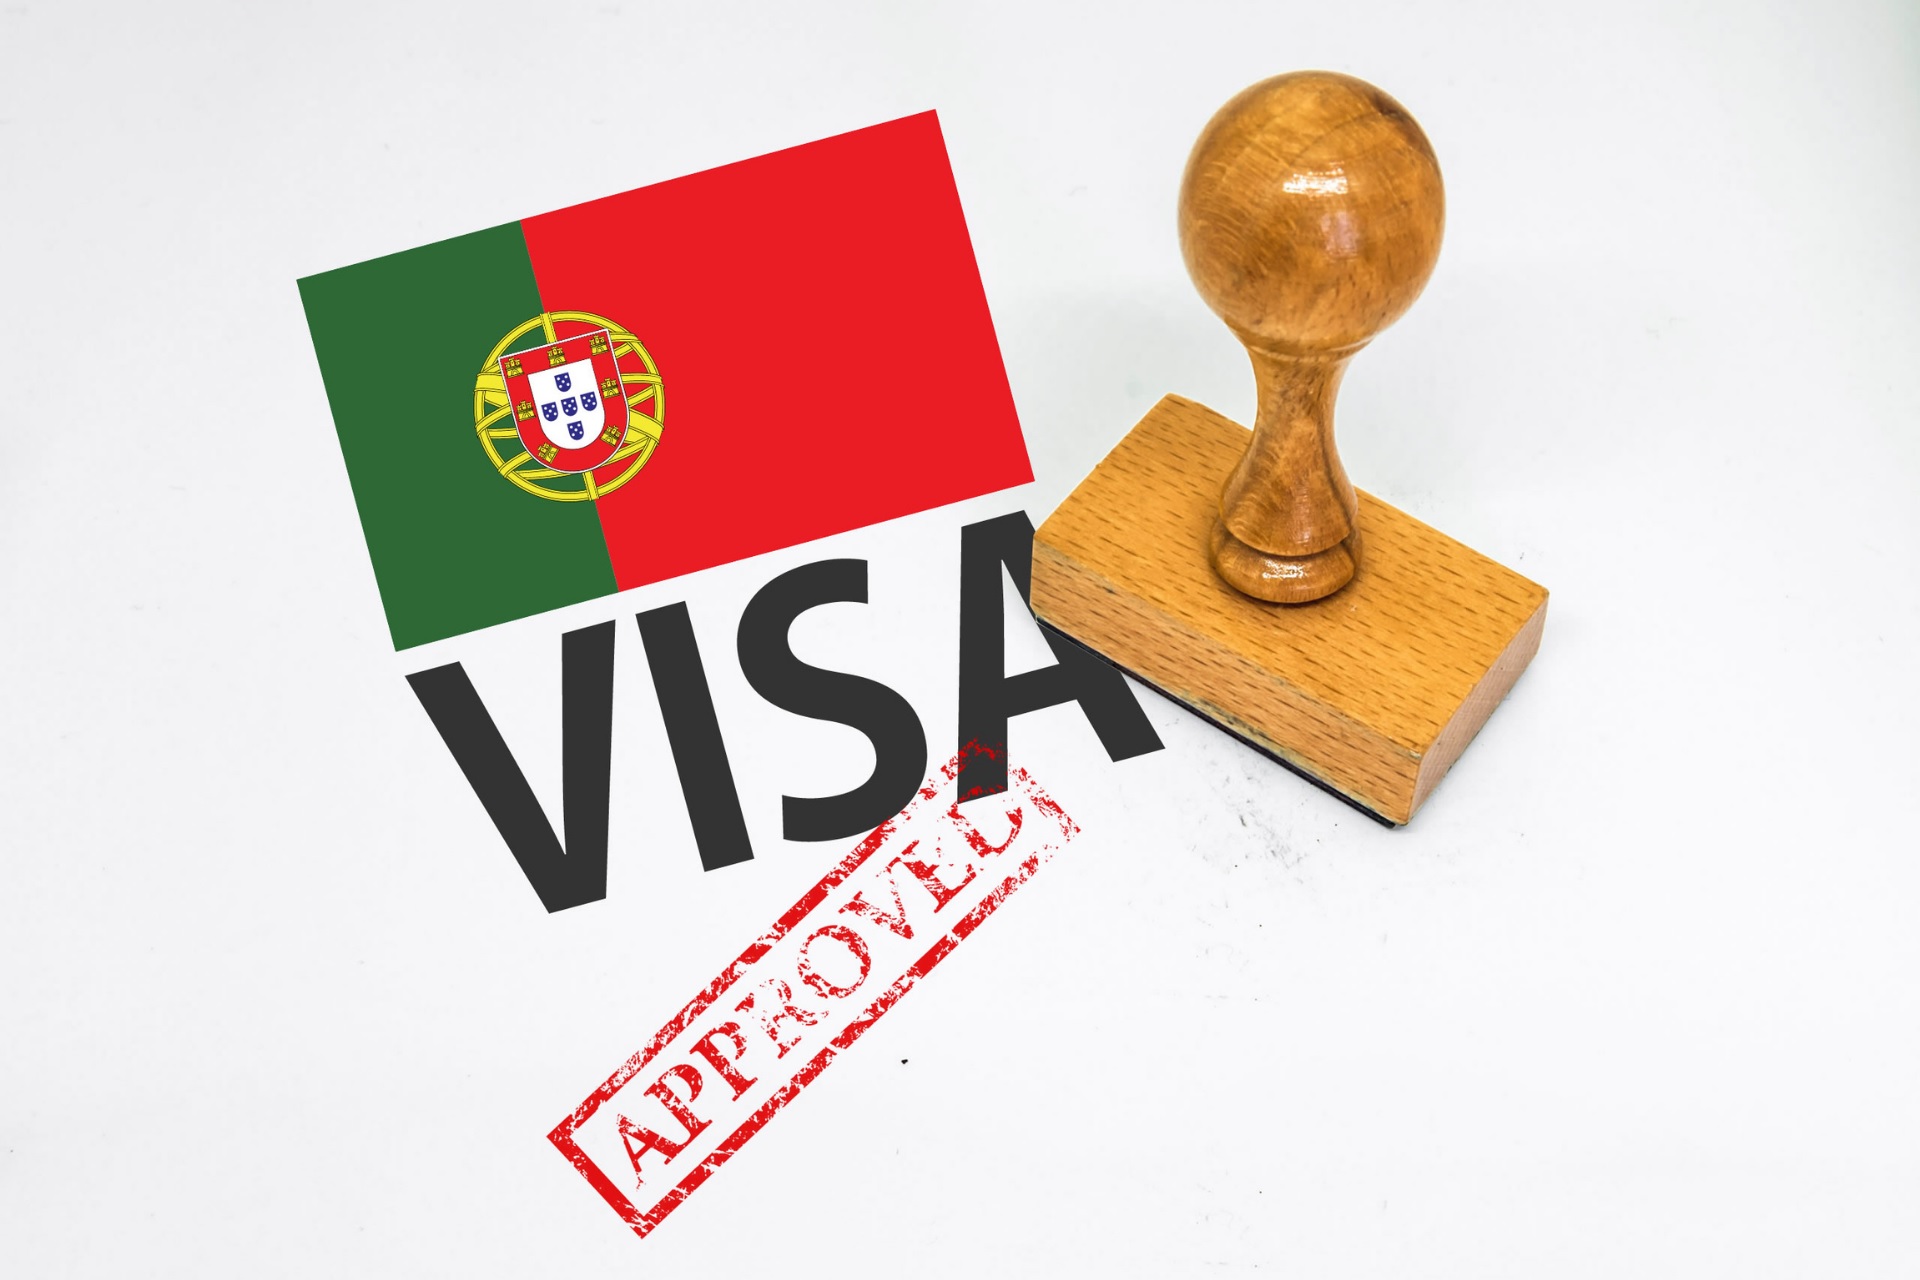 The United States, in turn, account for an accumulated investment of €268.2 million, with 466 golden visas granted.